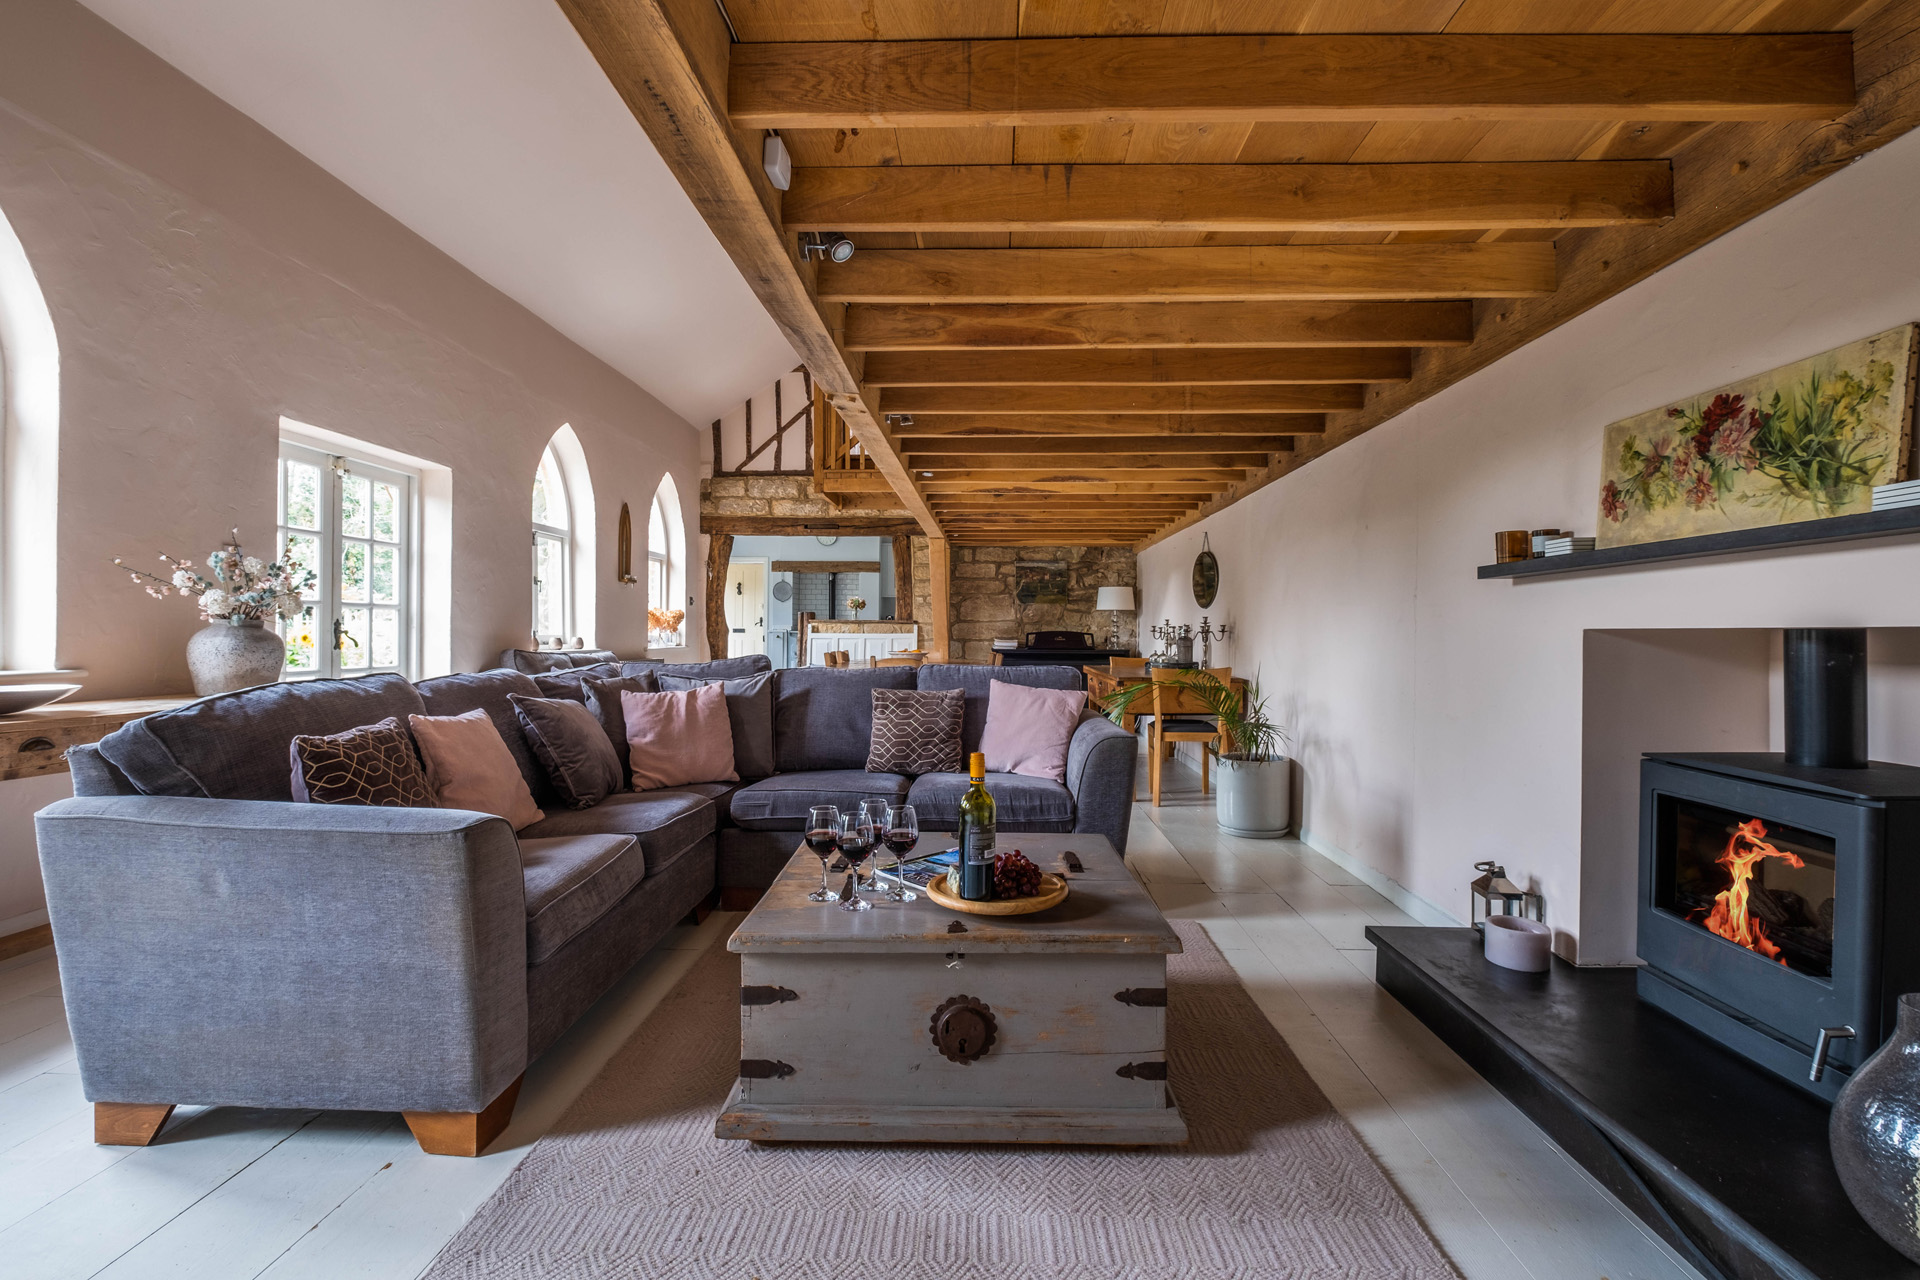 A spacious living room with wood beam ceilings